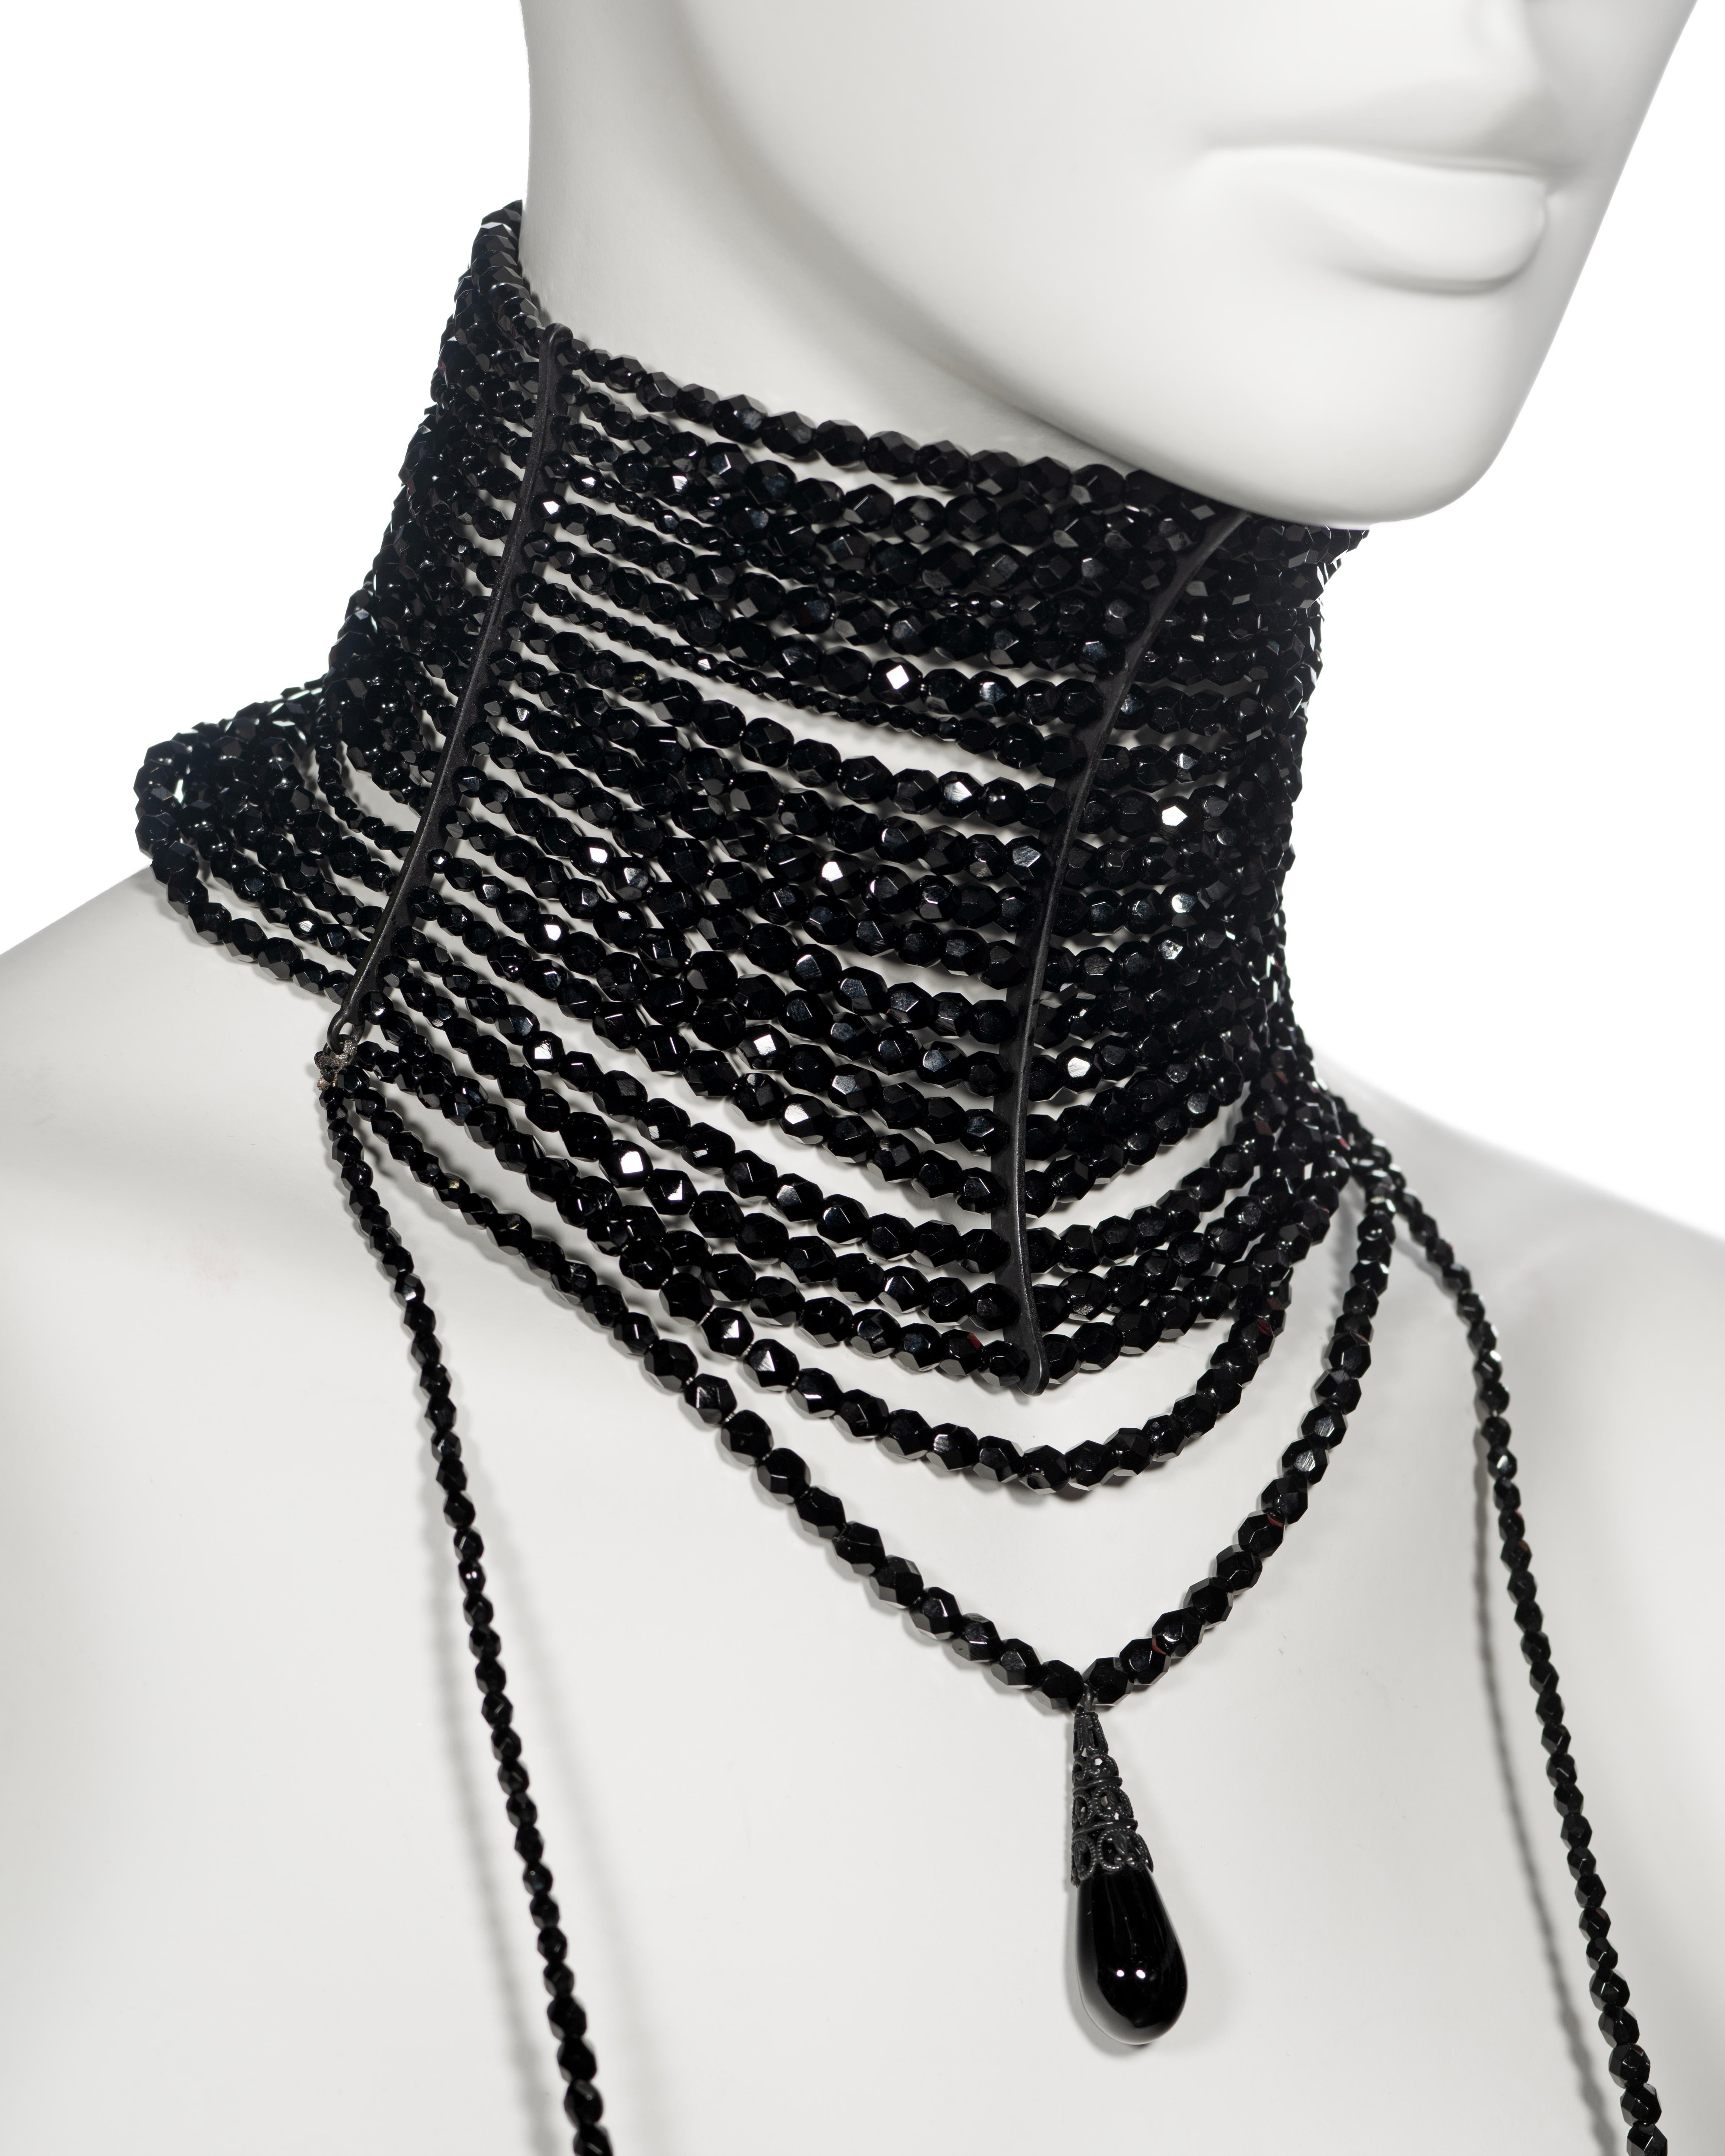 Christian Dior by John Galliano black beaded Masai choker necklace, ss 1999 For Sale 6